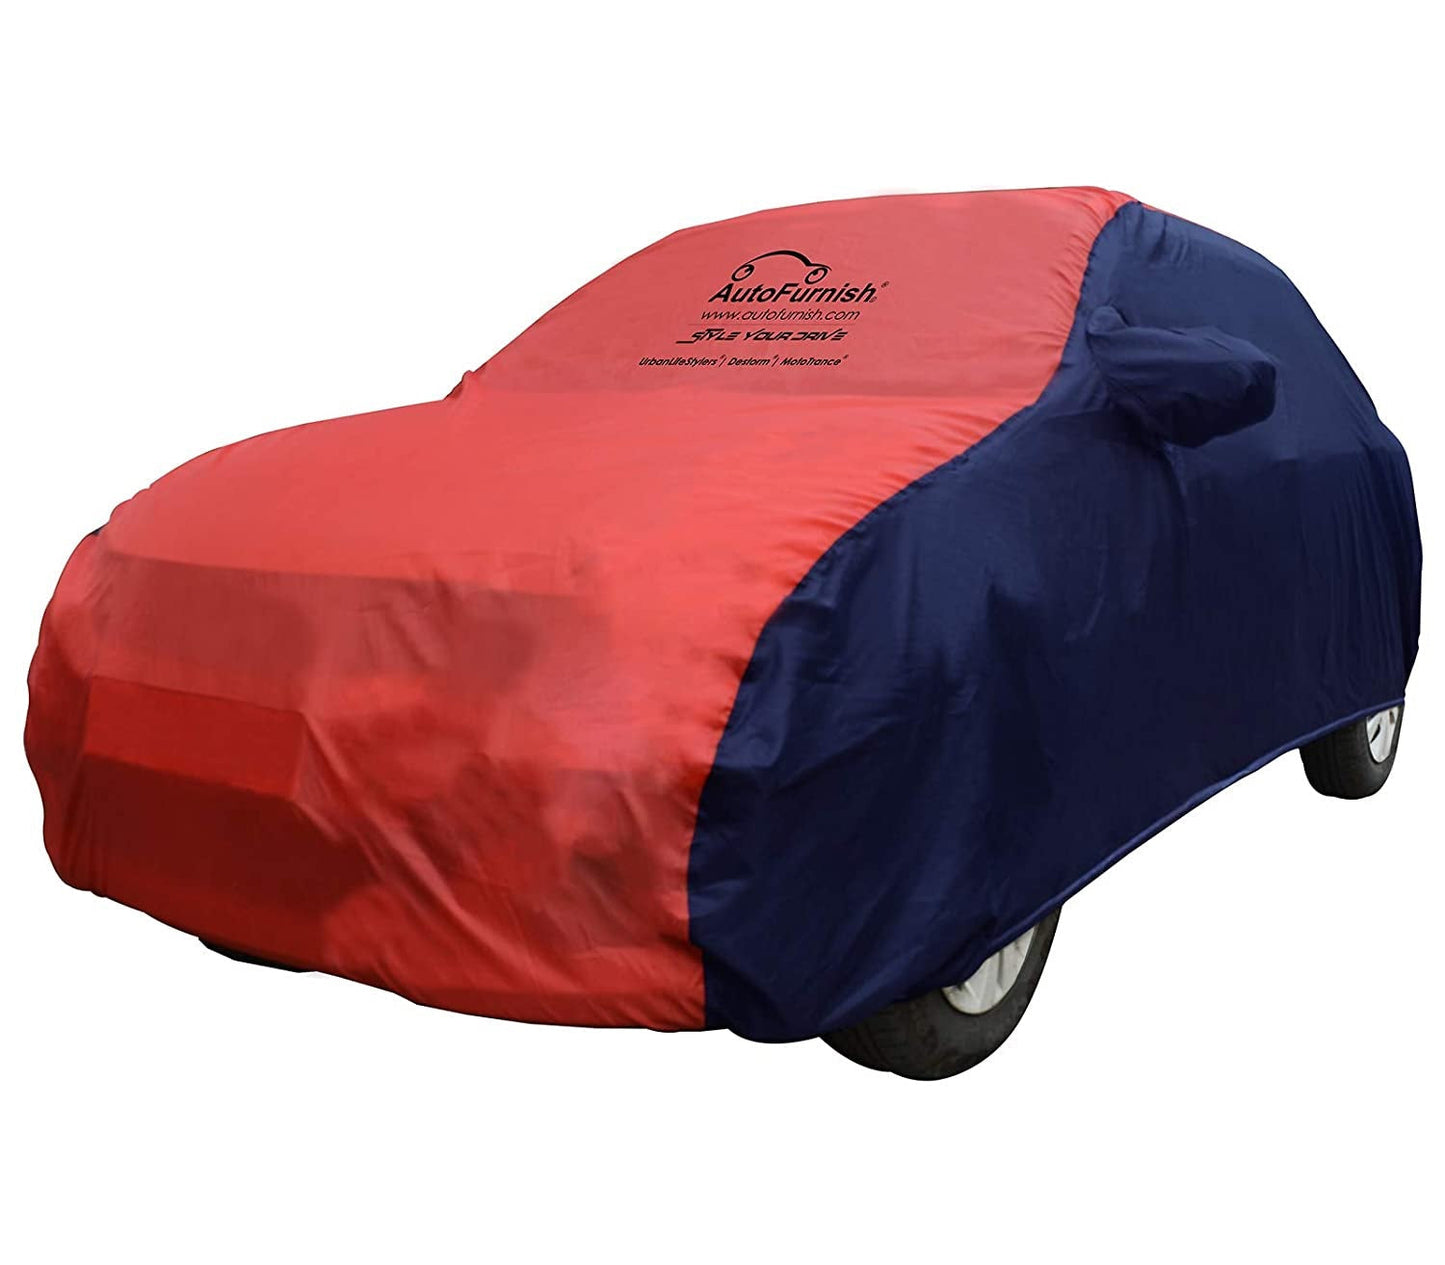 MG Hector Plus (2020) Car Body Cover, Triple Stitched, Heat & Water Resistant with Side Mirror Pockets (SPORTY Series)